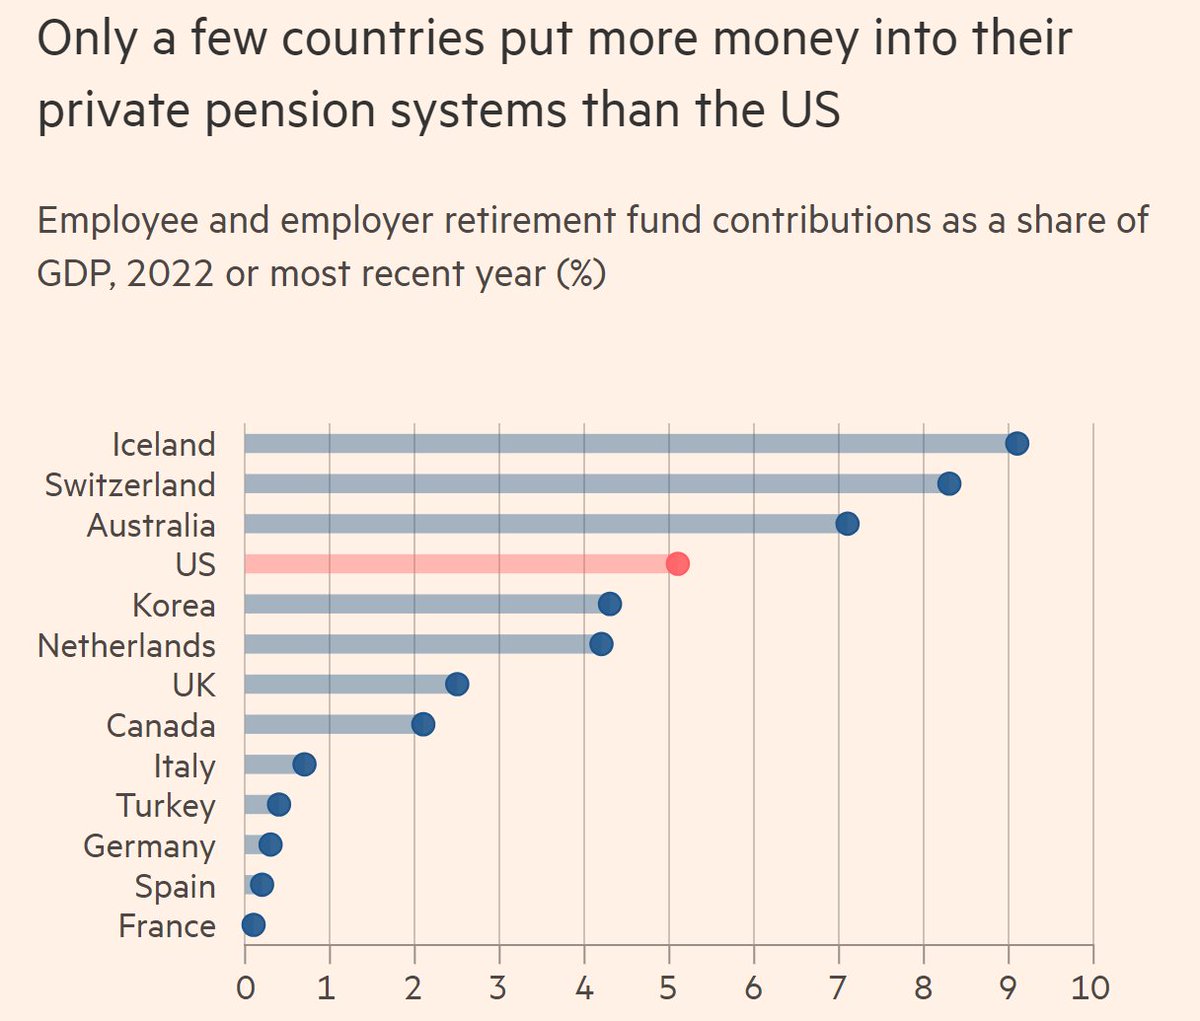 This @FT chart from @OECD data shows the US saves more for retirement than most developed countries. But it actually goes even further than that. @aeiecon /1